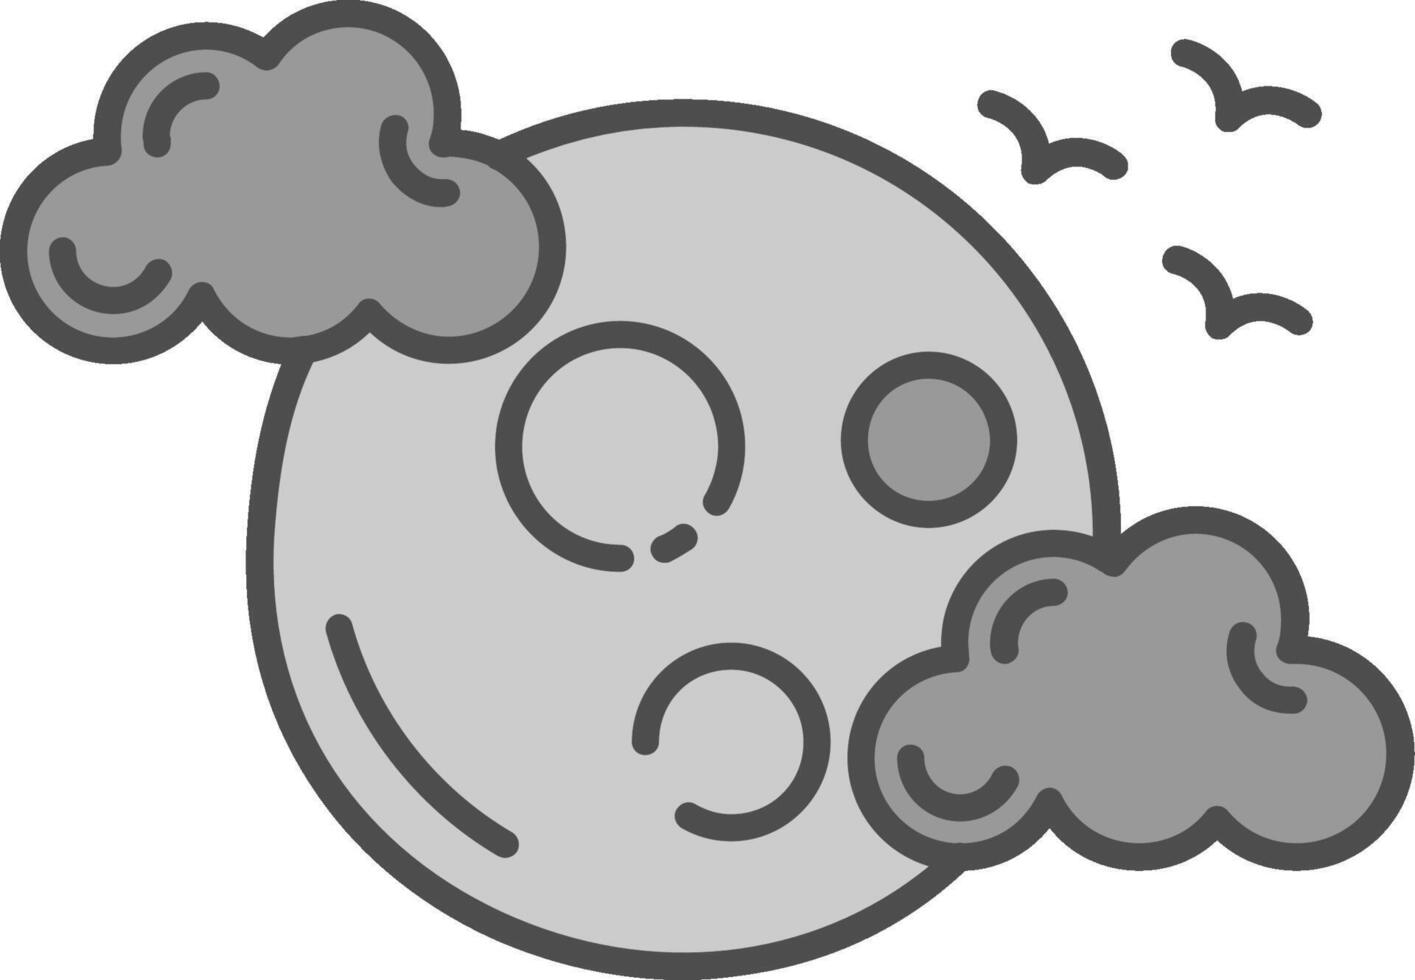 Full moon Line Filled Greyscale Icon vector